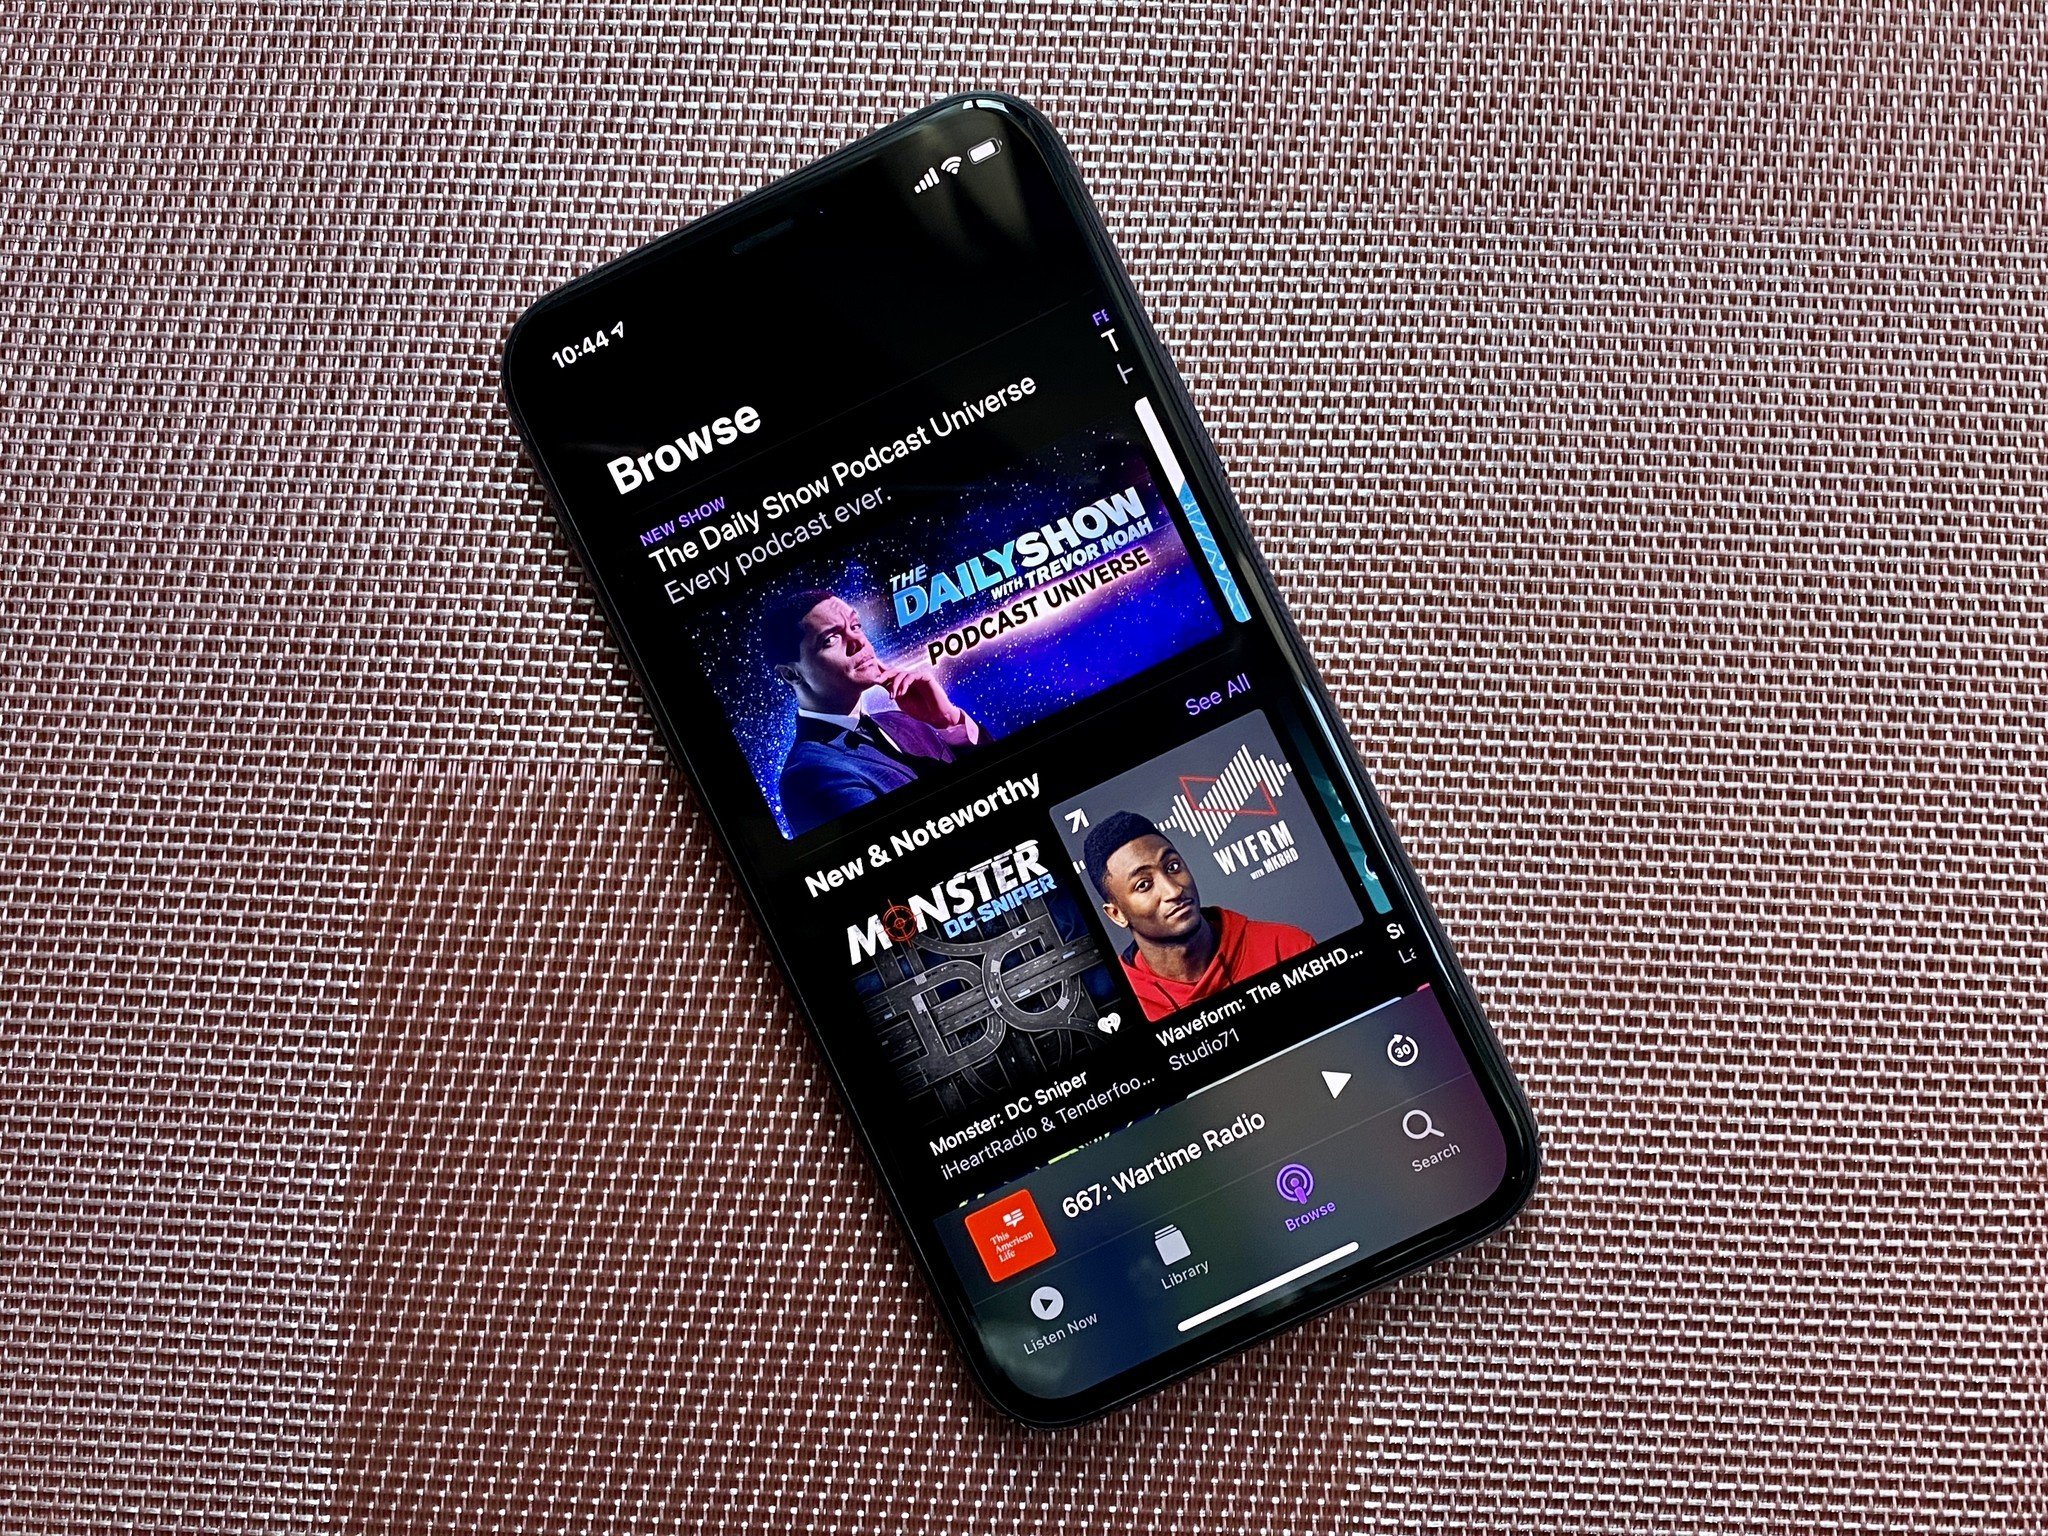 Browse Podcasts on iPhone 11 Pro